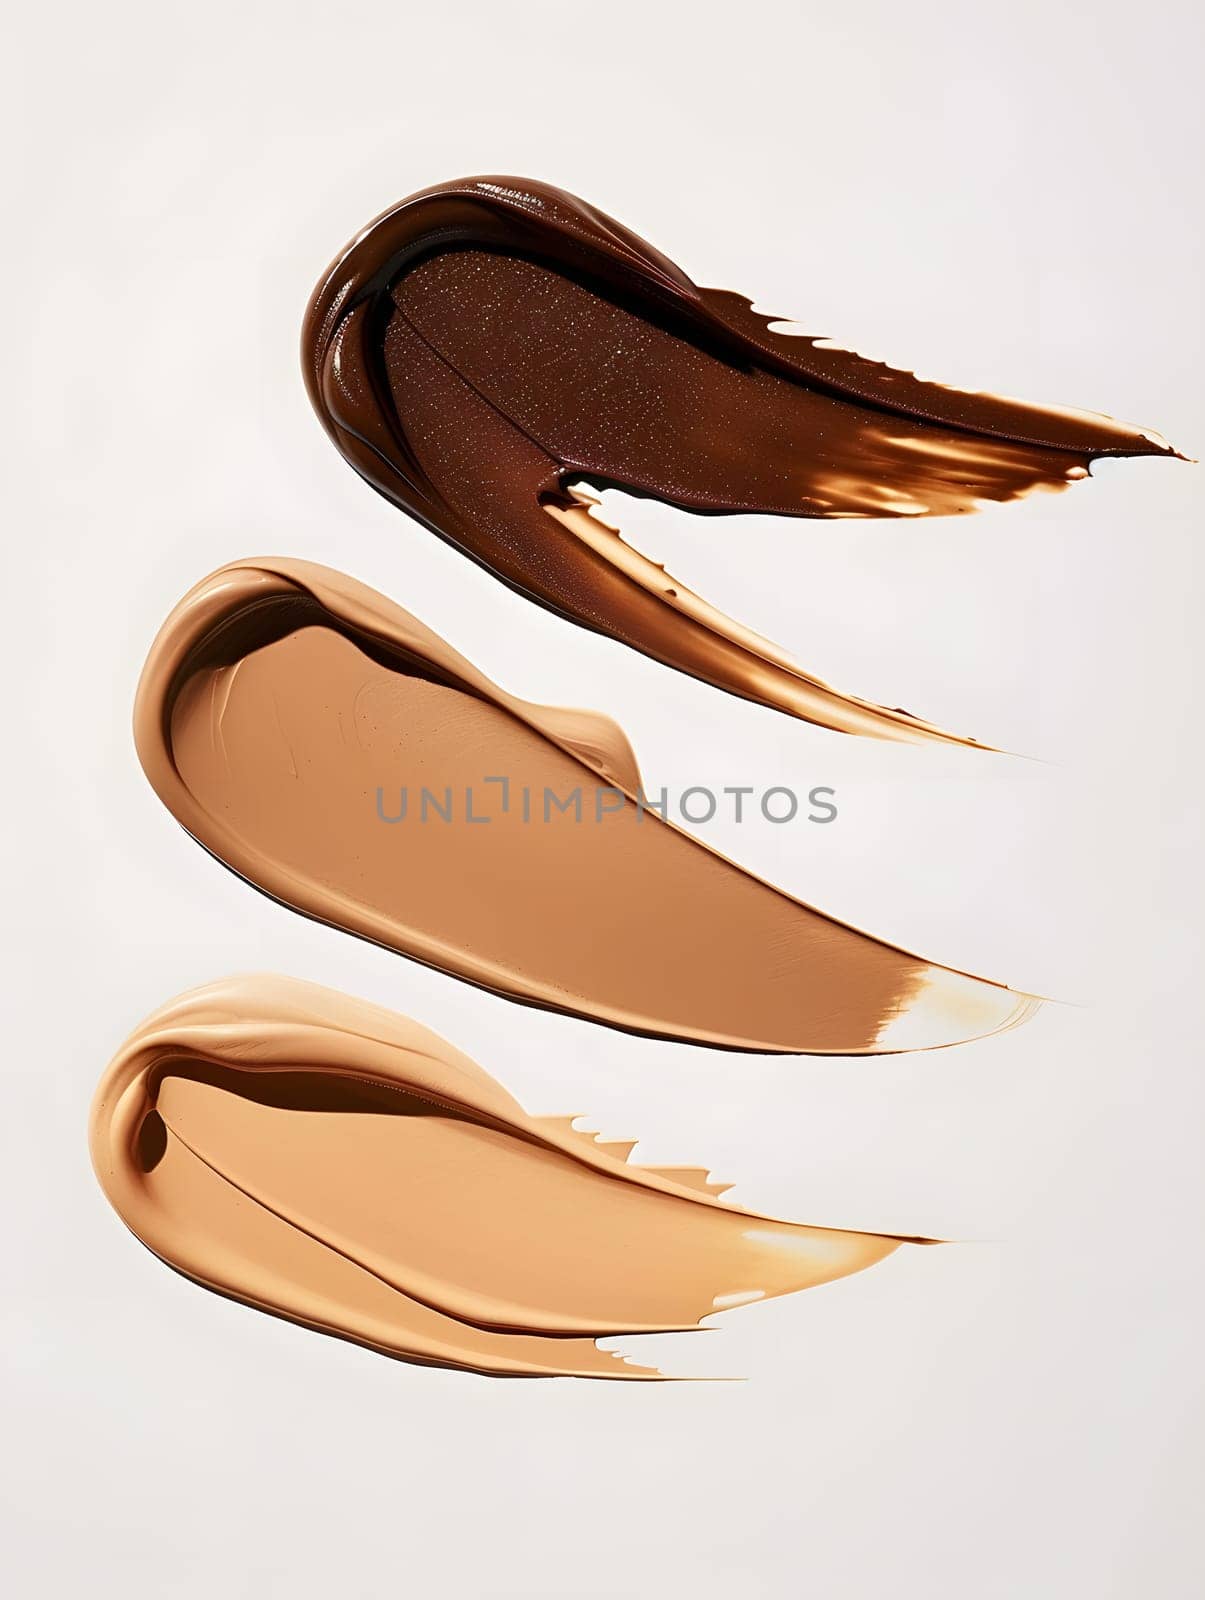 Three shades of foundation displayed against a white backdrop by Nadtochiy